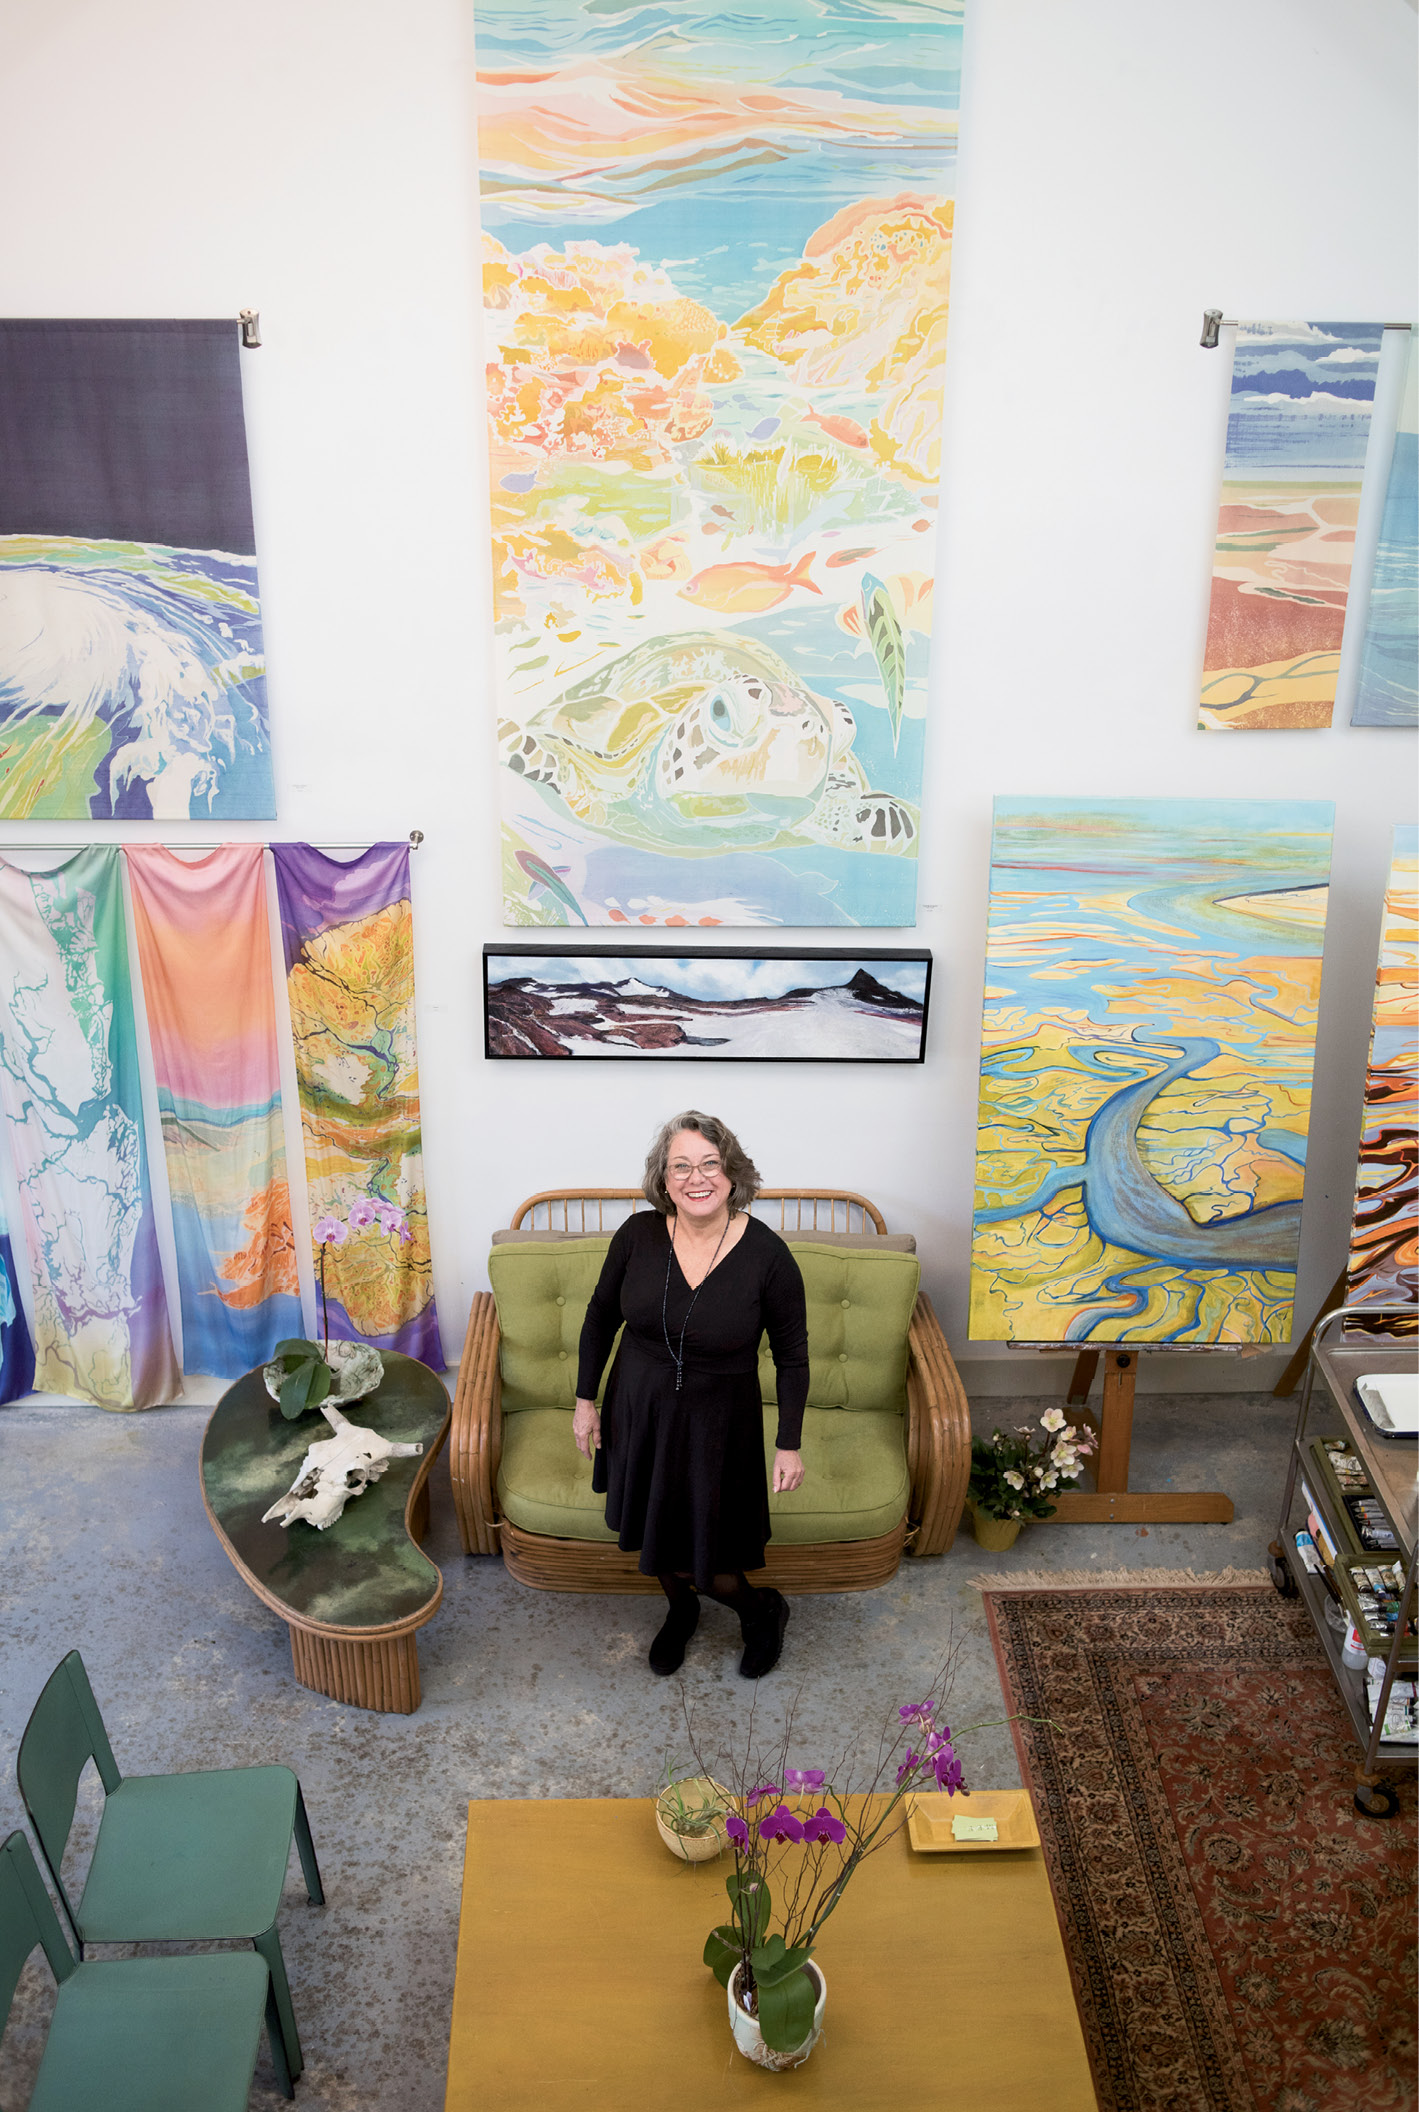 Looking Up: Fraser (photographed in her studio) brings an aerial perspective to her works, giving viewers a broader understanding of how human actions impact the landscape. “I go where I feel I’m most needed,” she says, in choosing her subject matter.